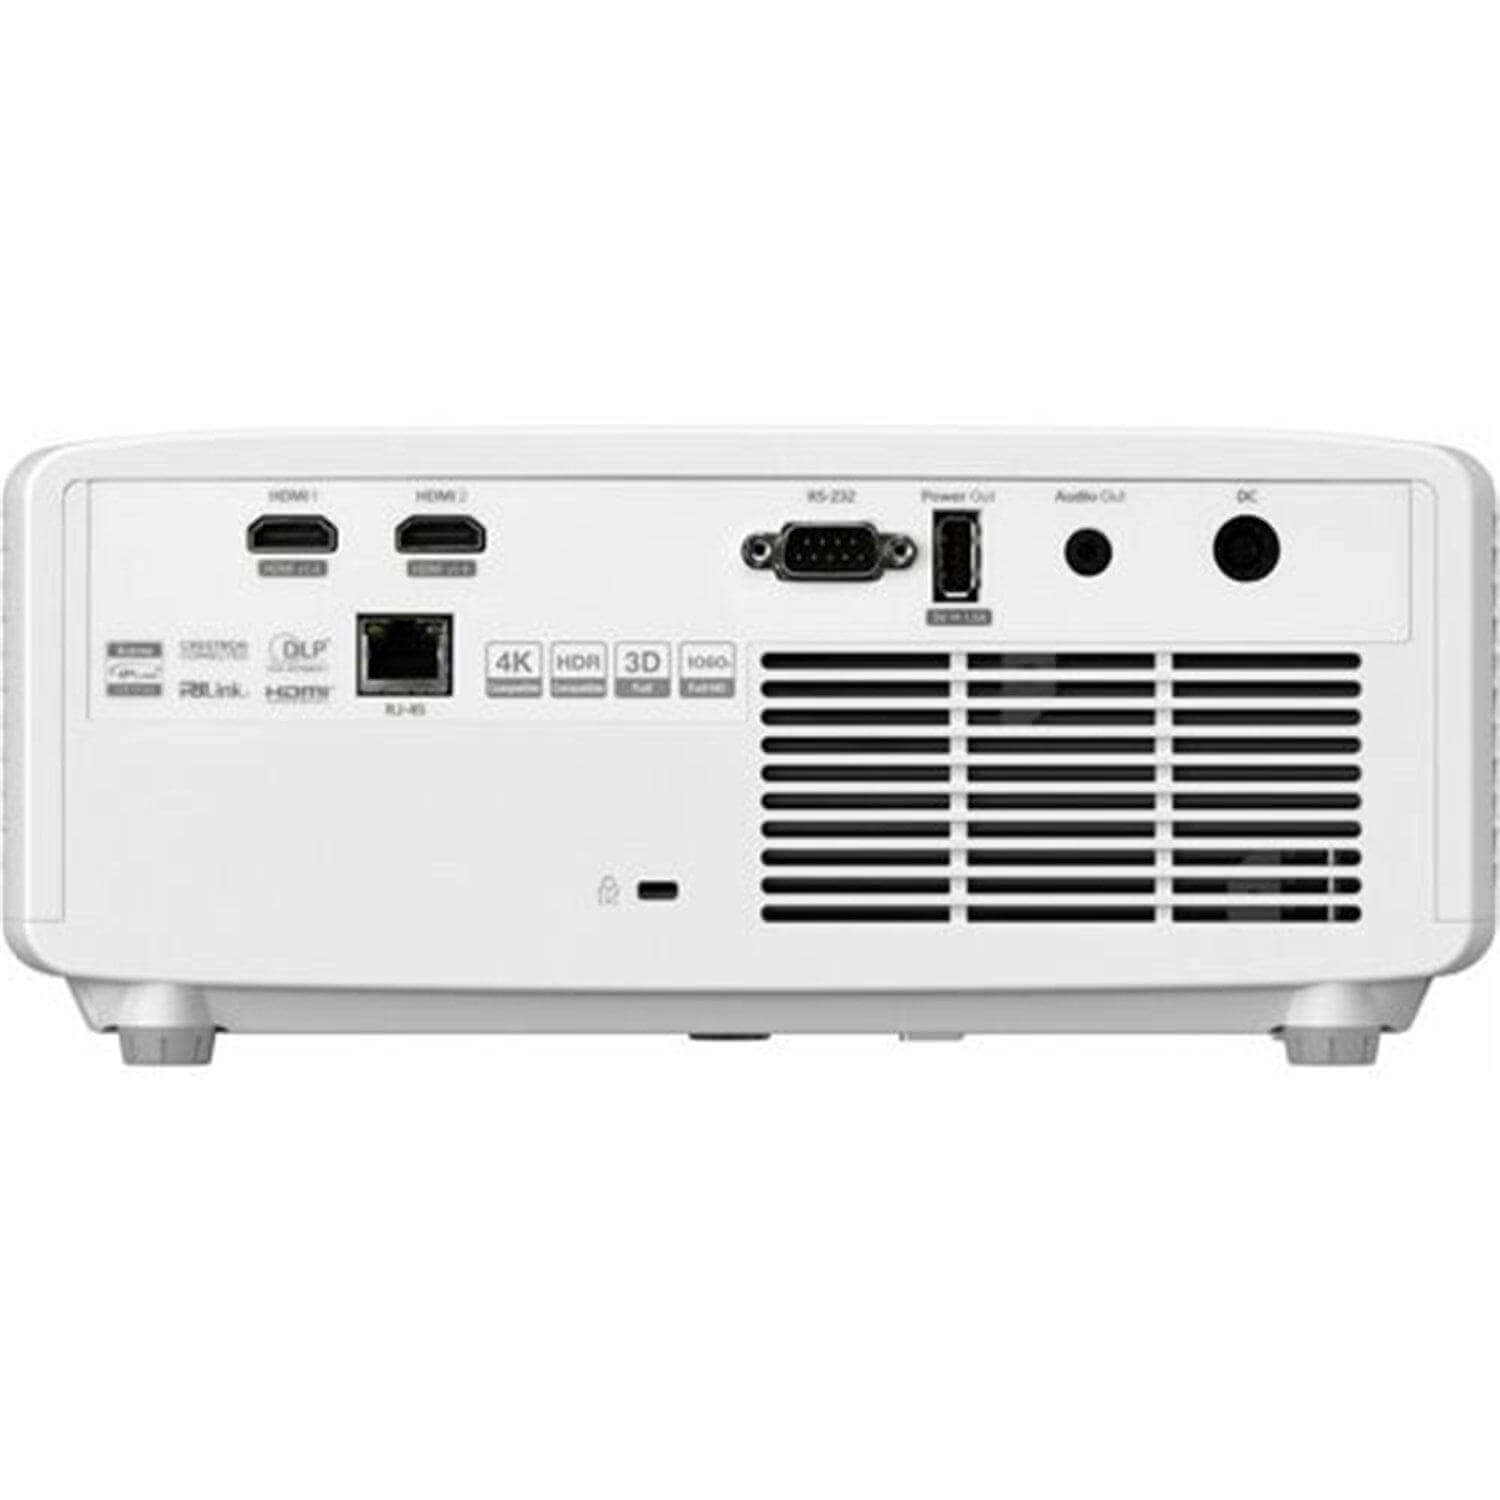 Optoma ZH450ST 1080p 4200 Lumens Laser Light Source Projector